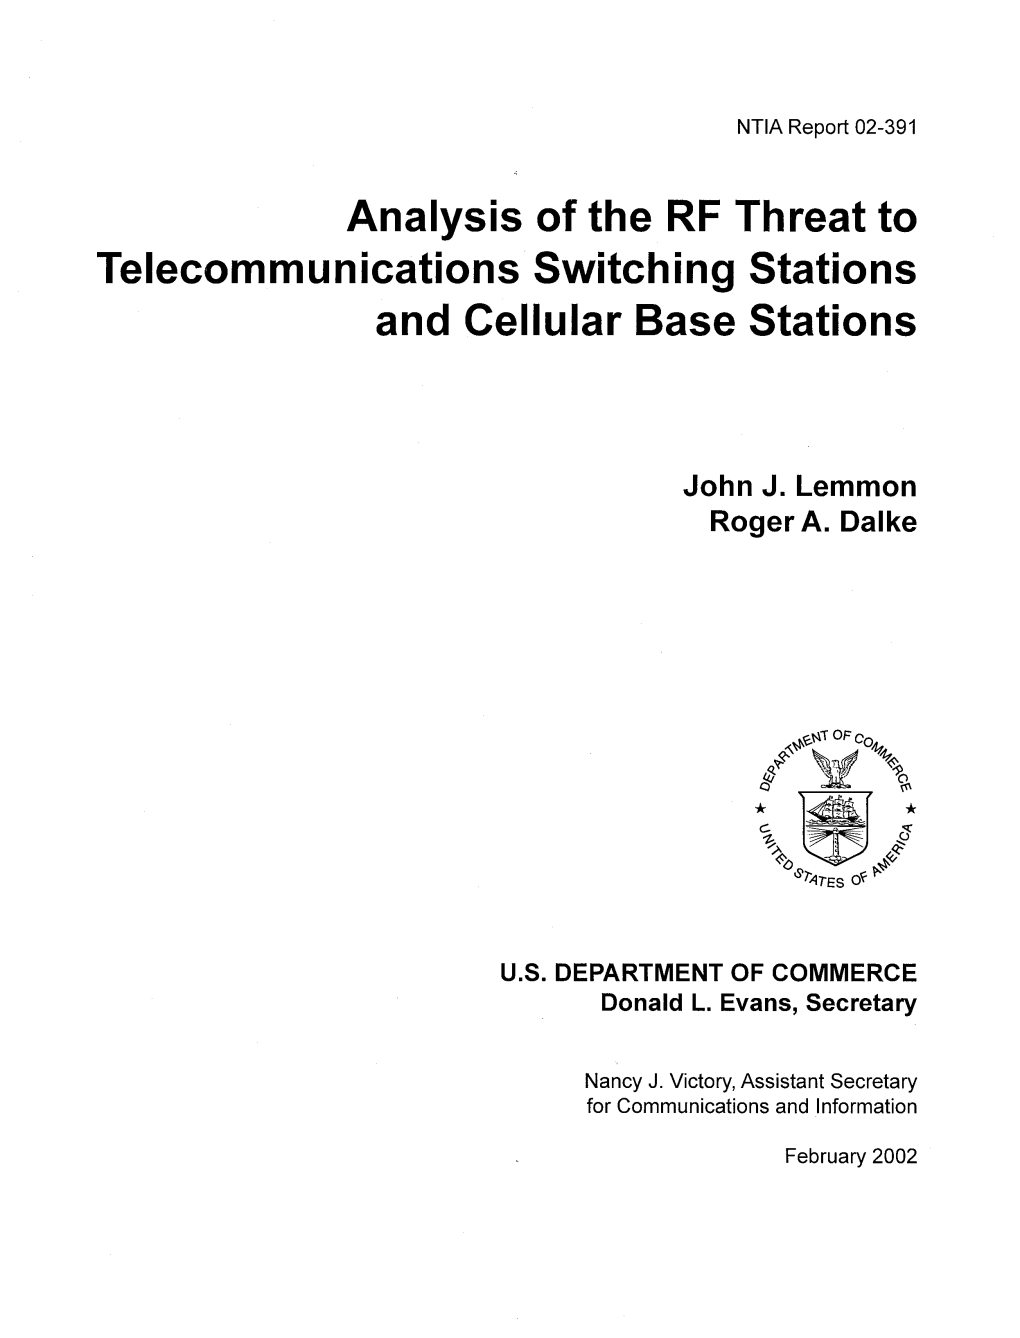 Analysis of the RF Threat to Telecommunications Switching Stations and Cellular Base Stations